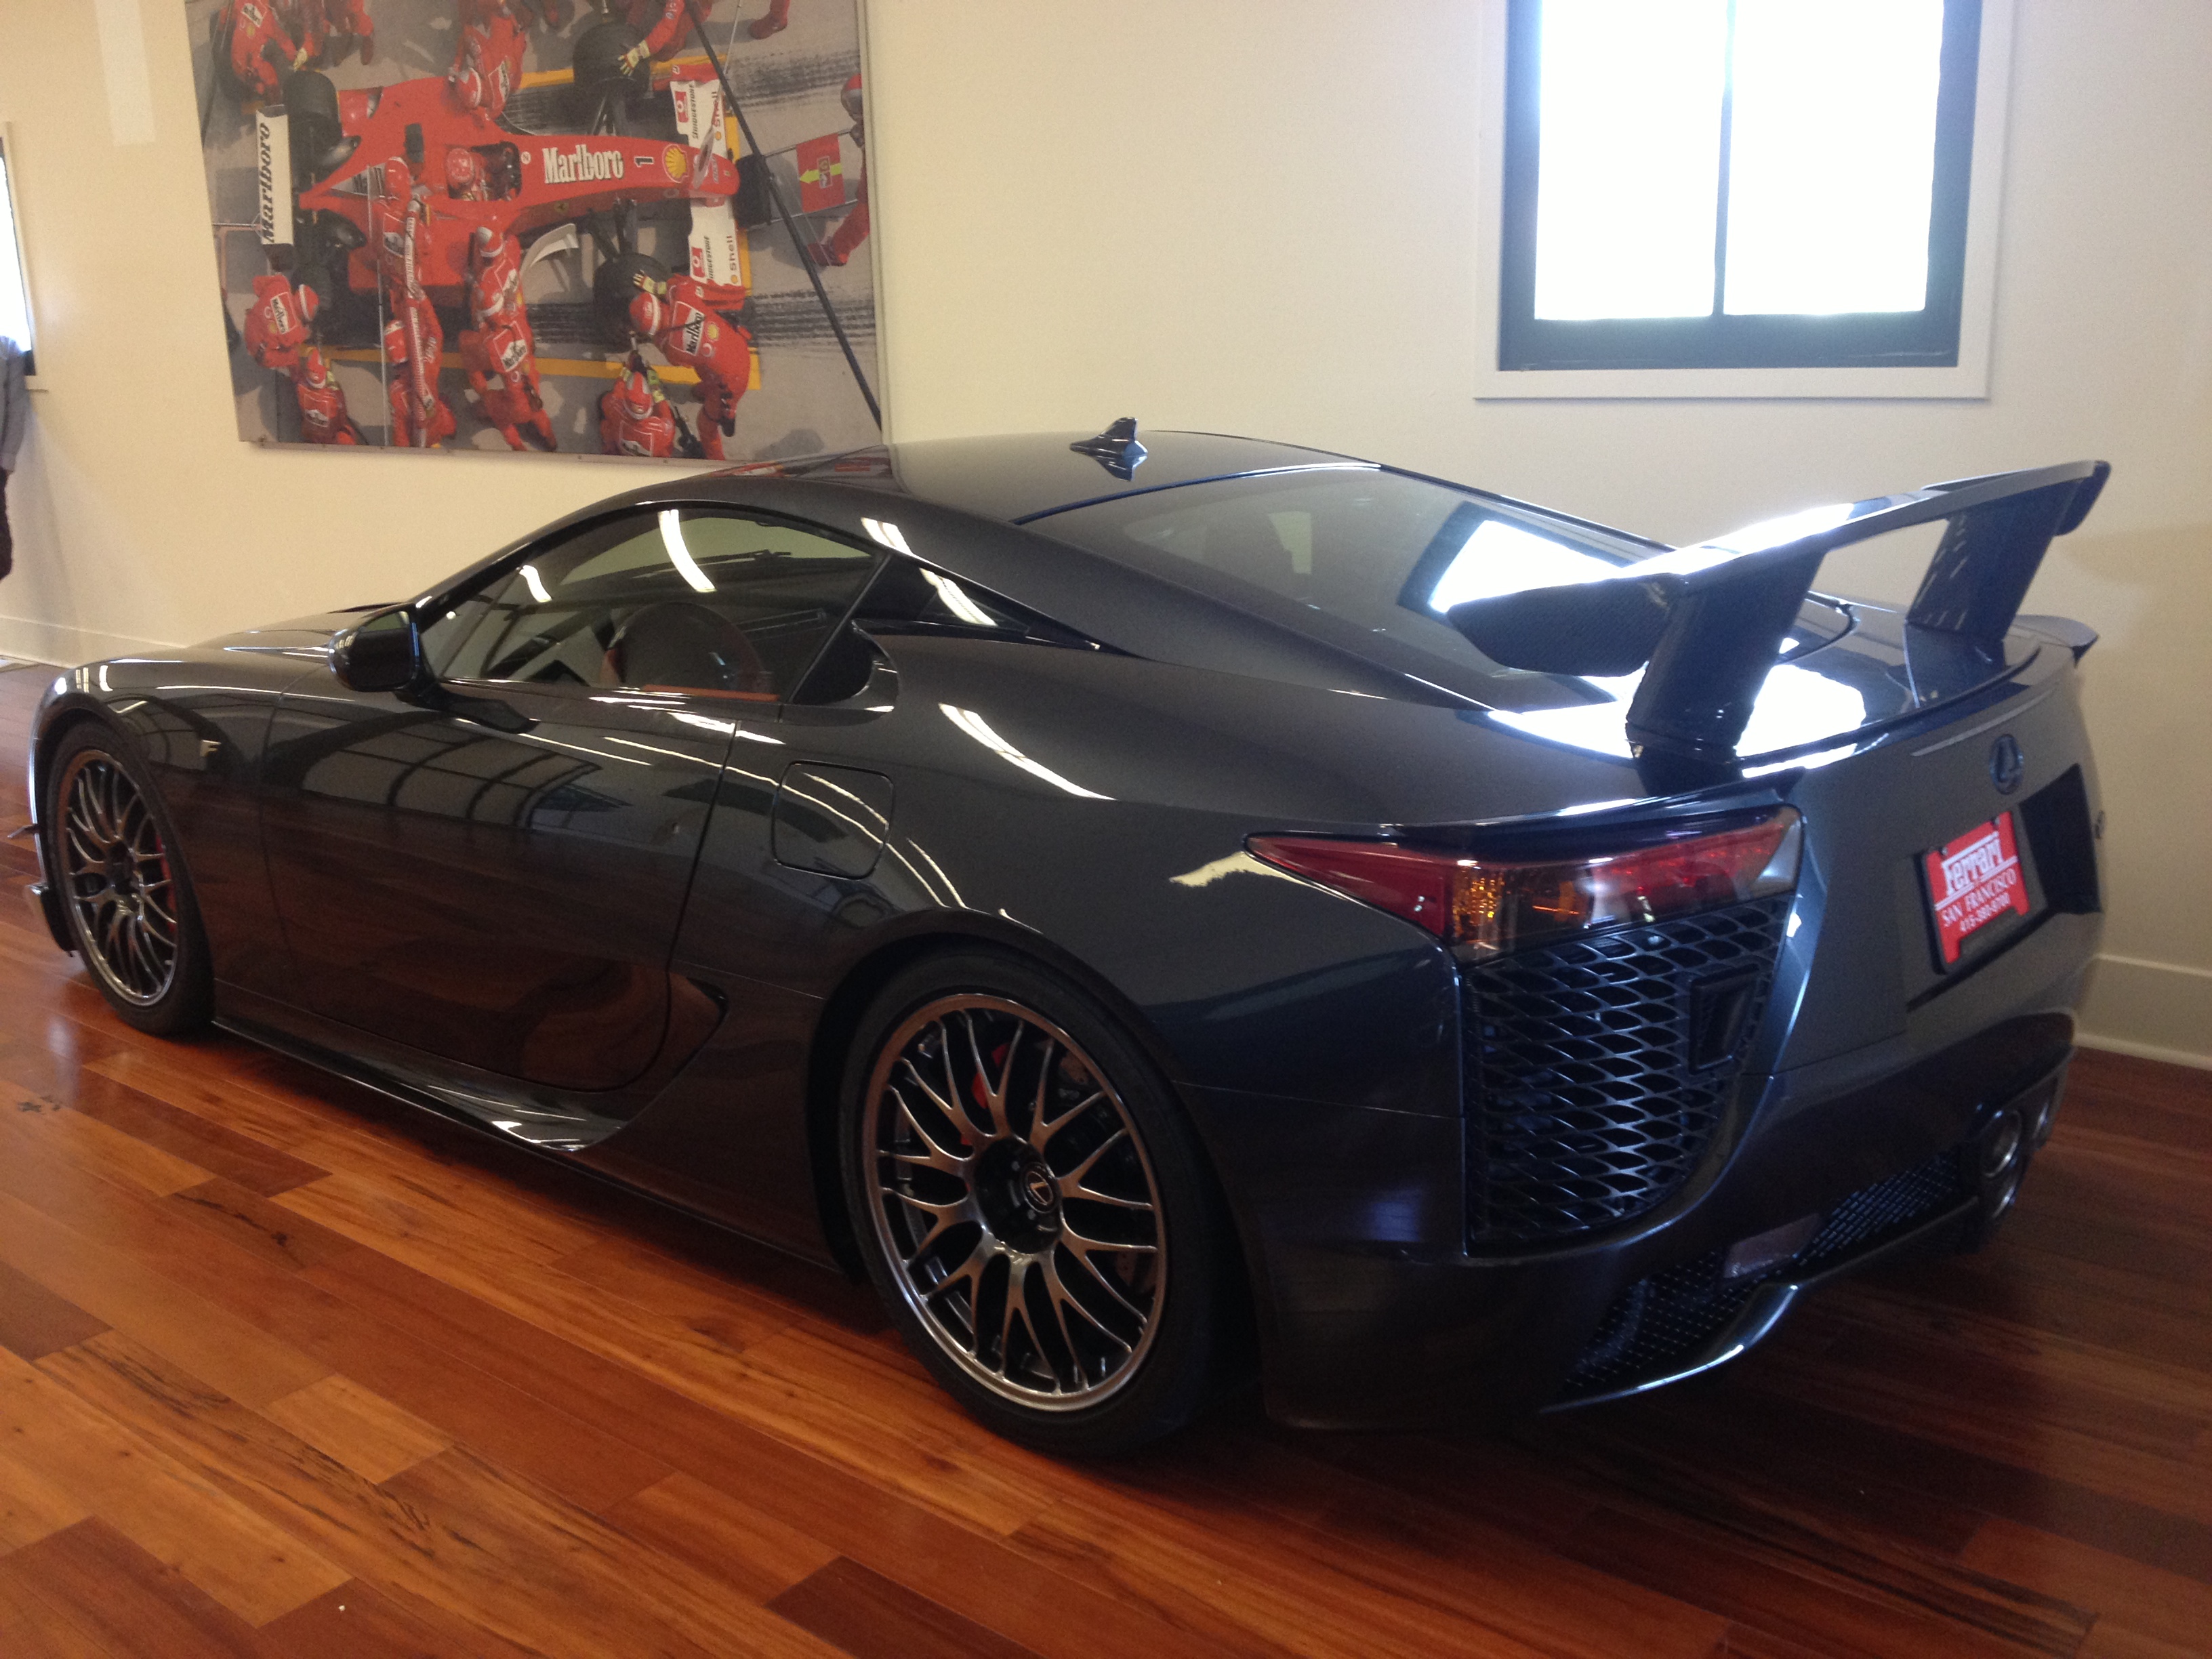 To Buy The World 50 Limited Lexus Lfa Nurburgring Package Import Agent And Export Agency Car Auction Agency Of New And Used Cars From The United States Import Agent And